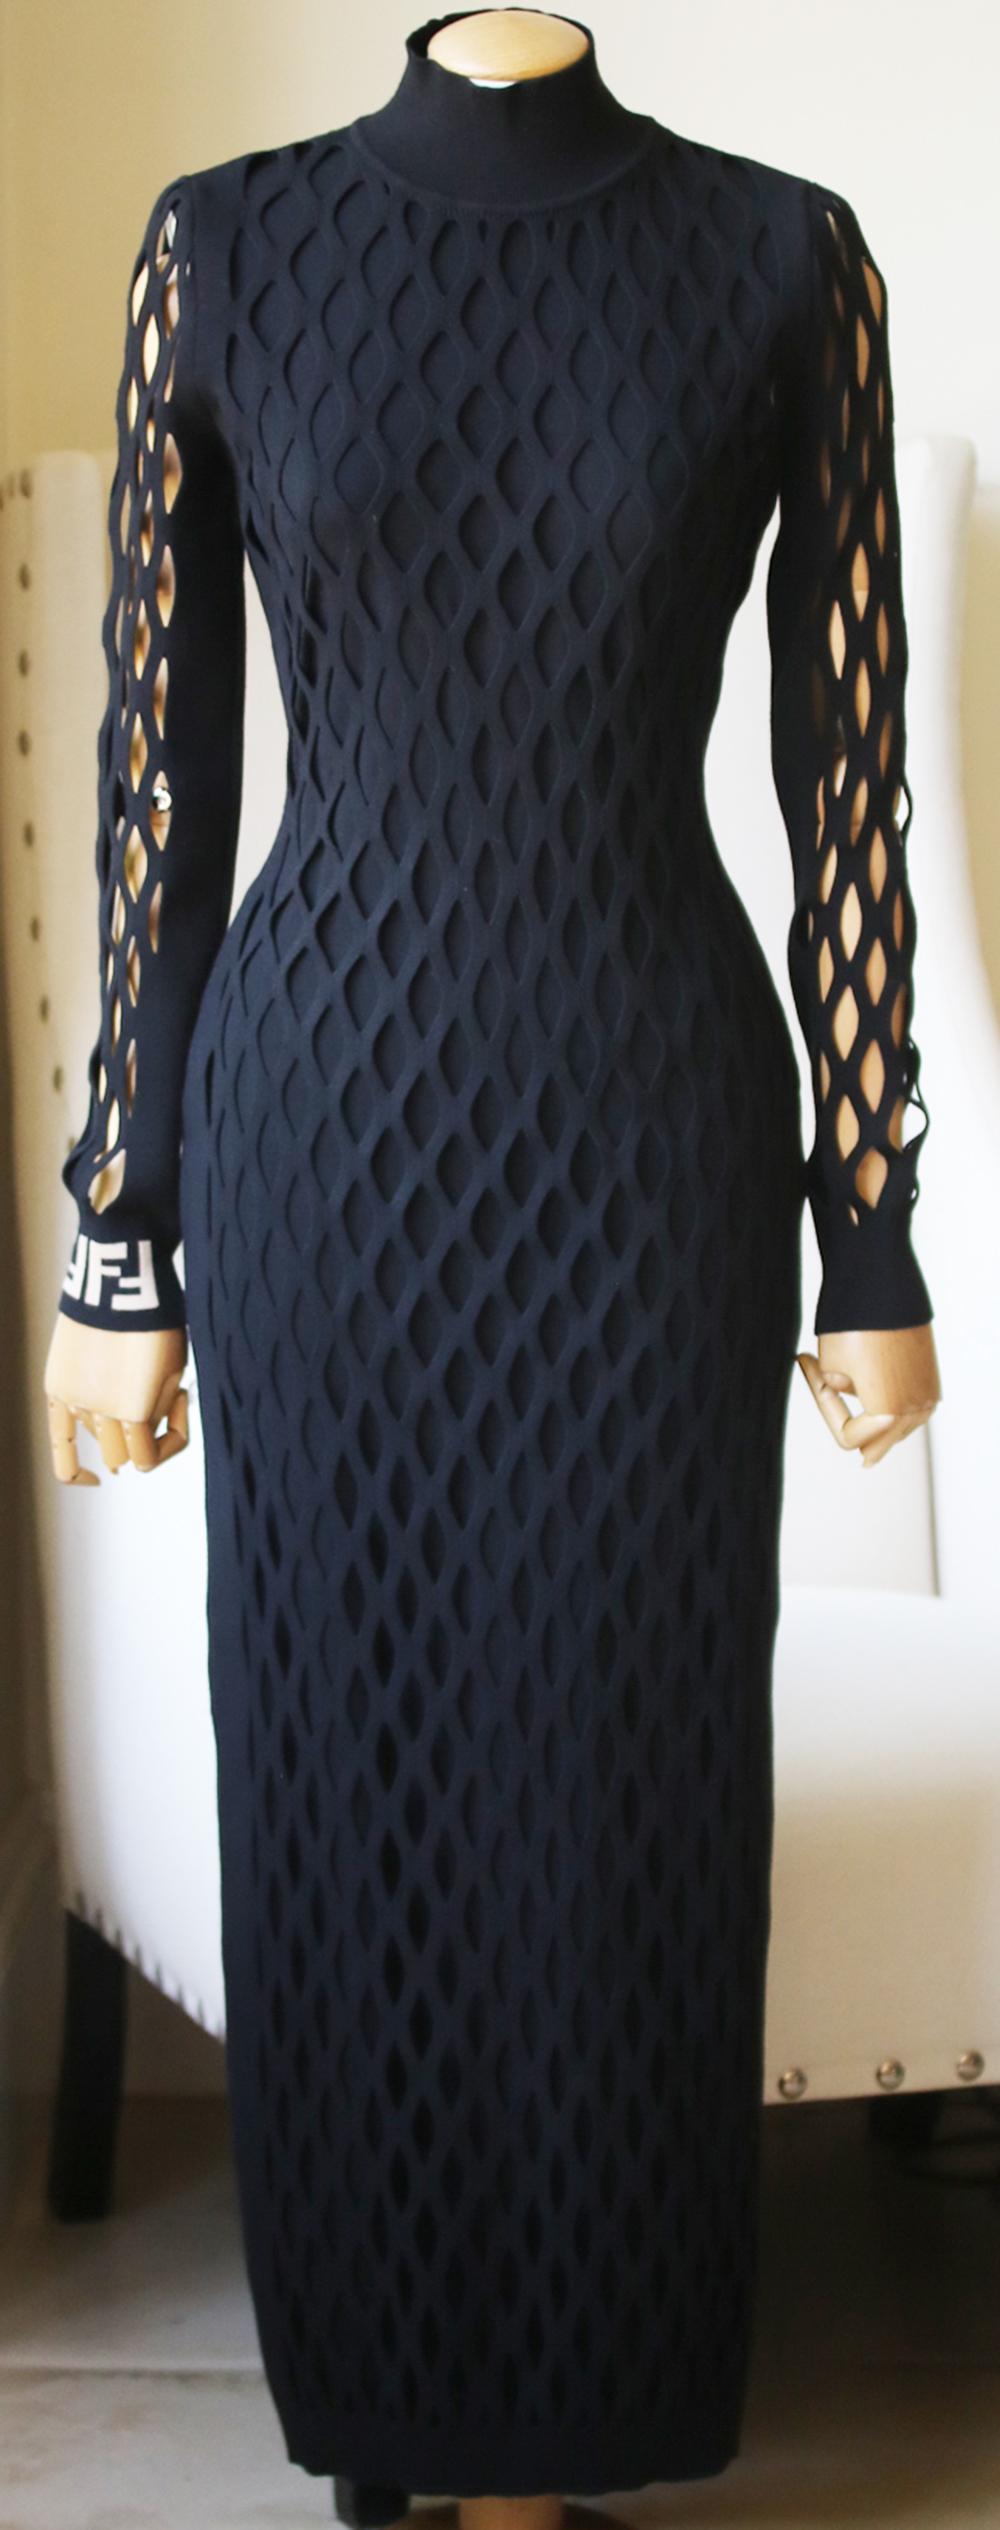 Fendi's jacquard-knit stretch-mesh midi dress features the house's iconic 'FF' monogram in beige on the wrist.
Designed to accentuate your curves, it has a turtleneck and long oversized mesh cutout sleeves.
Black stretch jacquard-knit.
Slips on.
67%